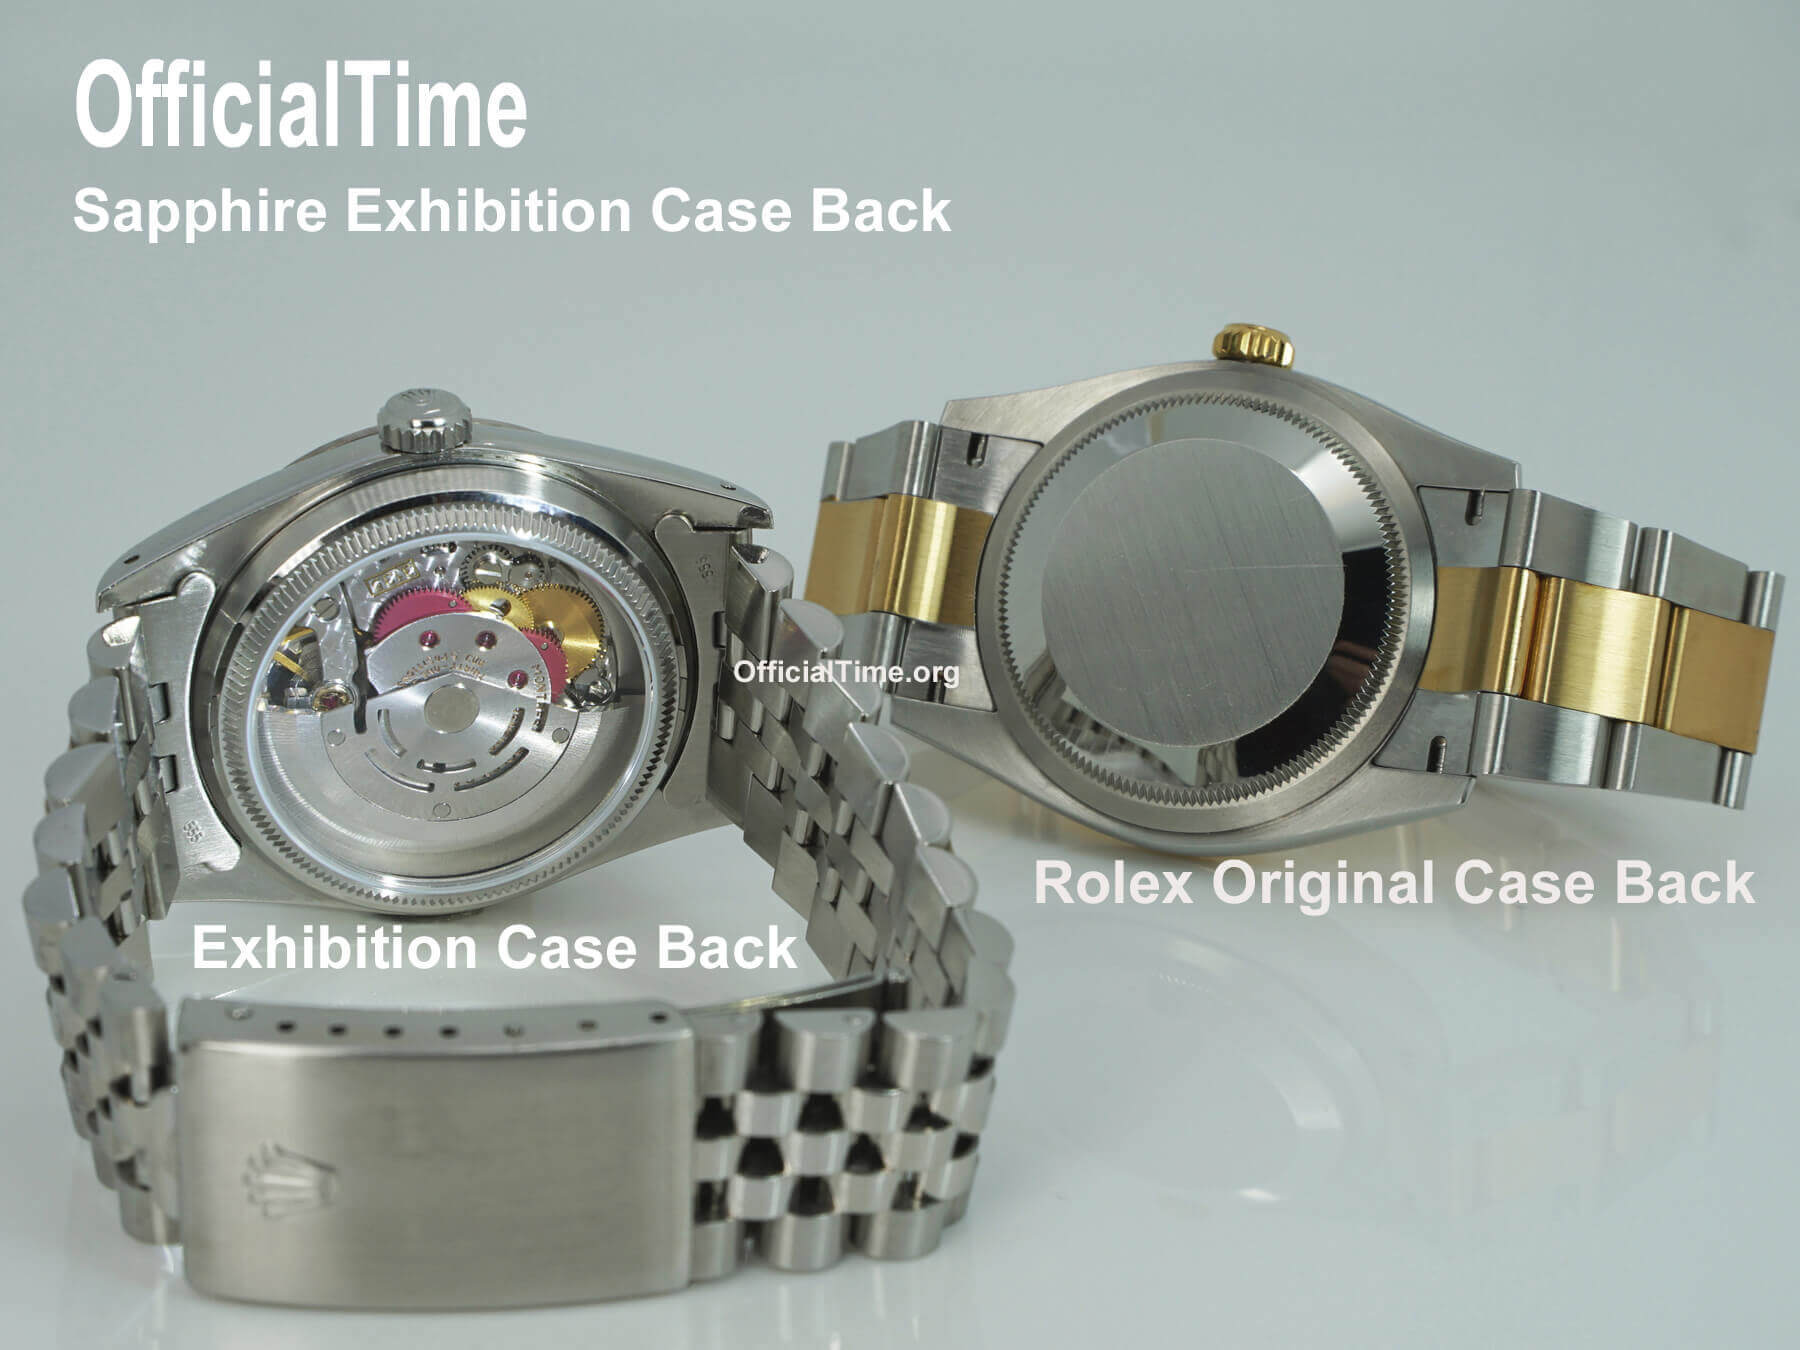 OfficialTime Exhibition Case Back GMT-Master II